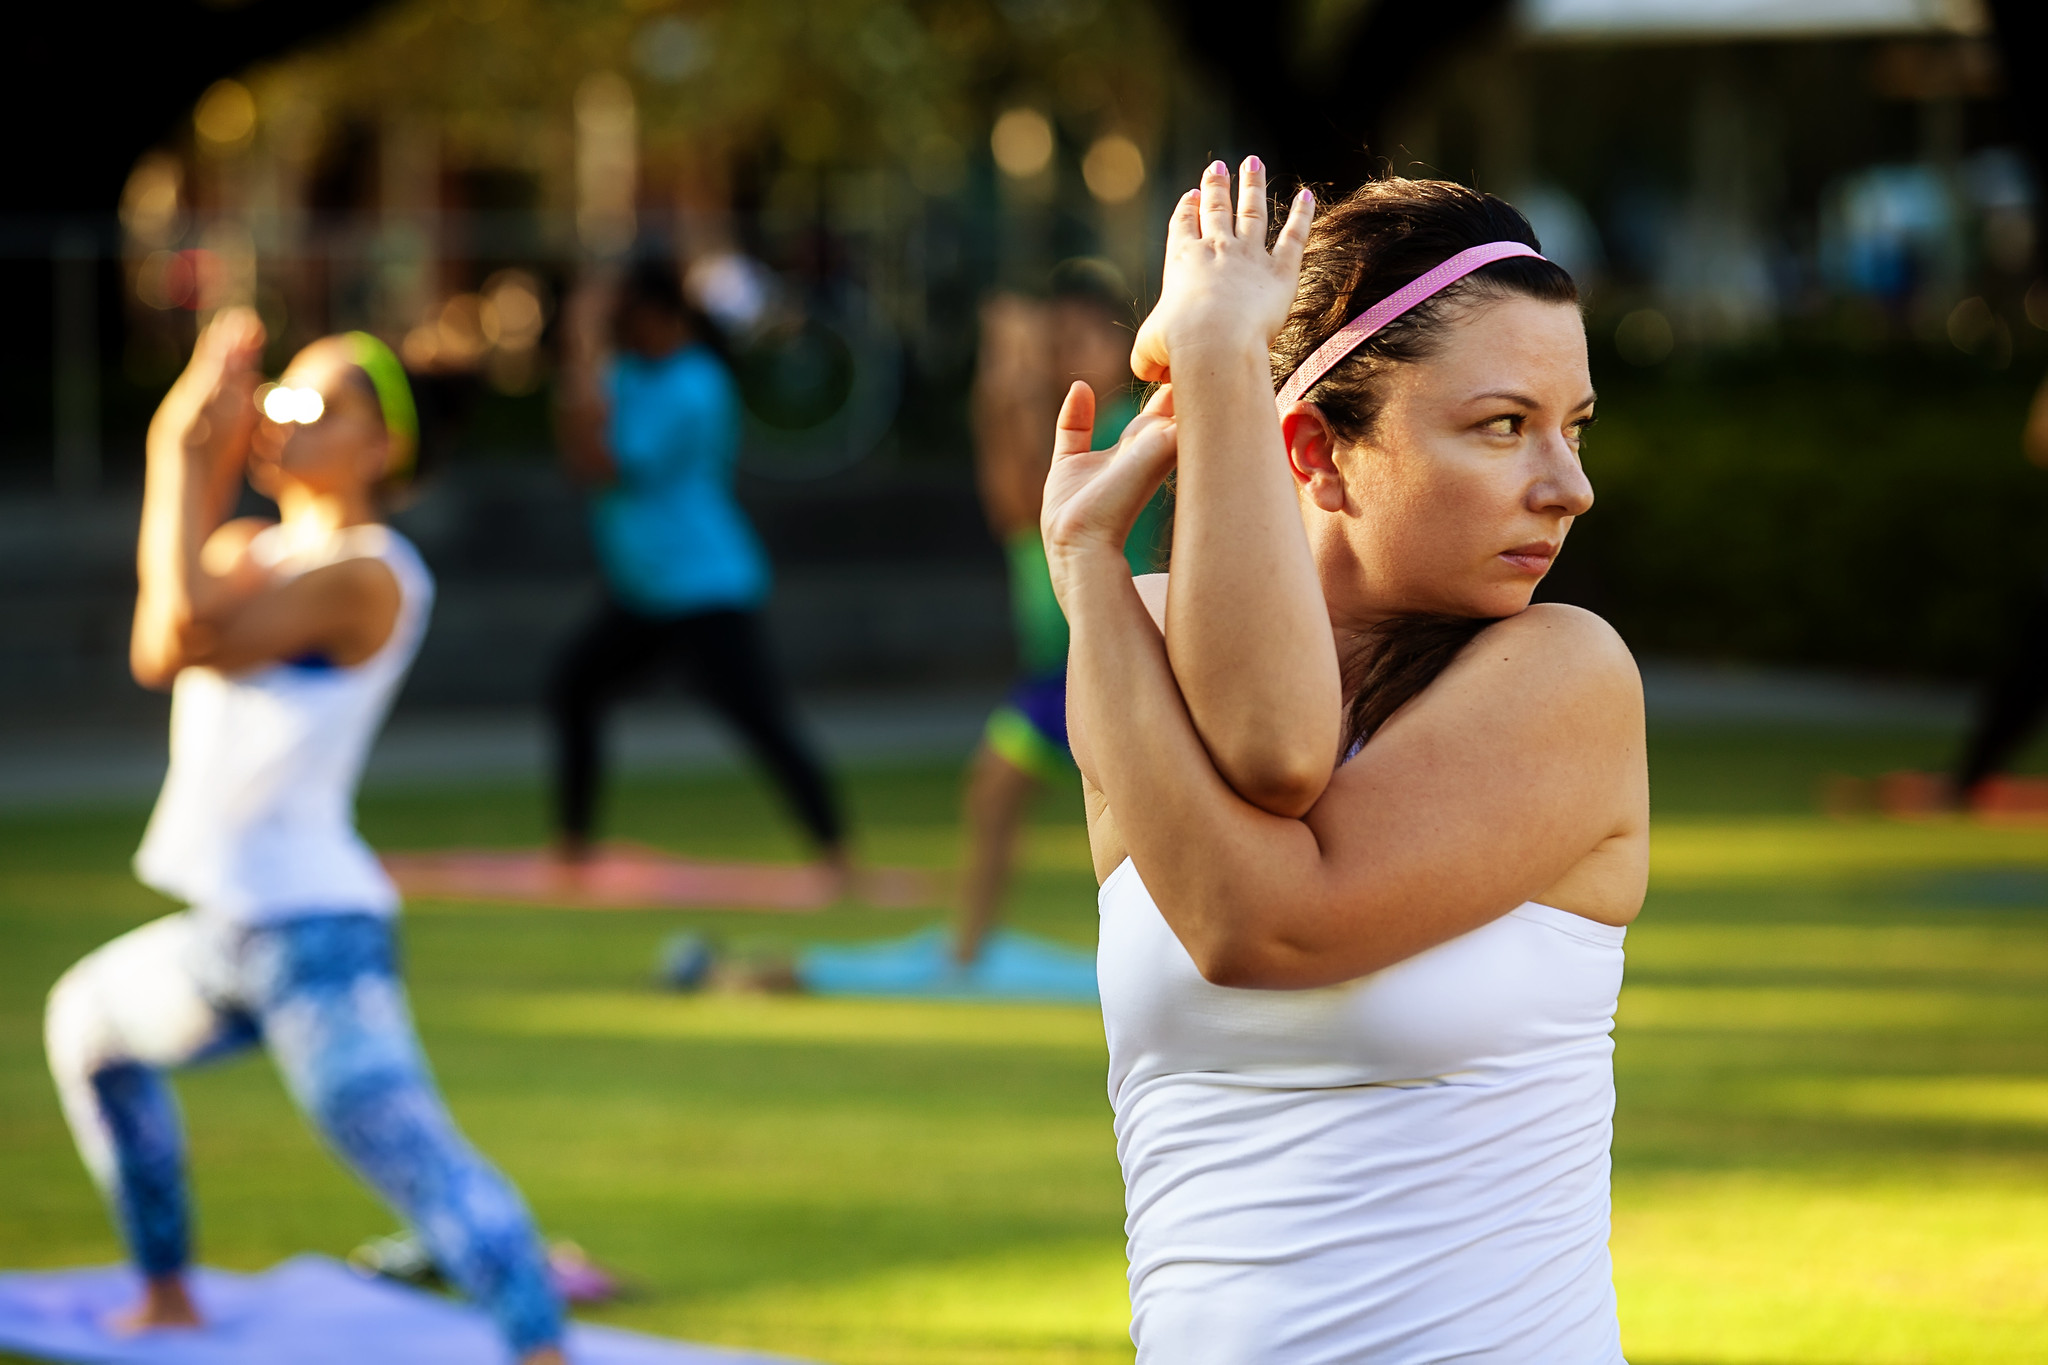 HIIT class with FitMix Communities at Discovery Green presented by The J.W. Couch Foundation